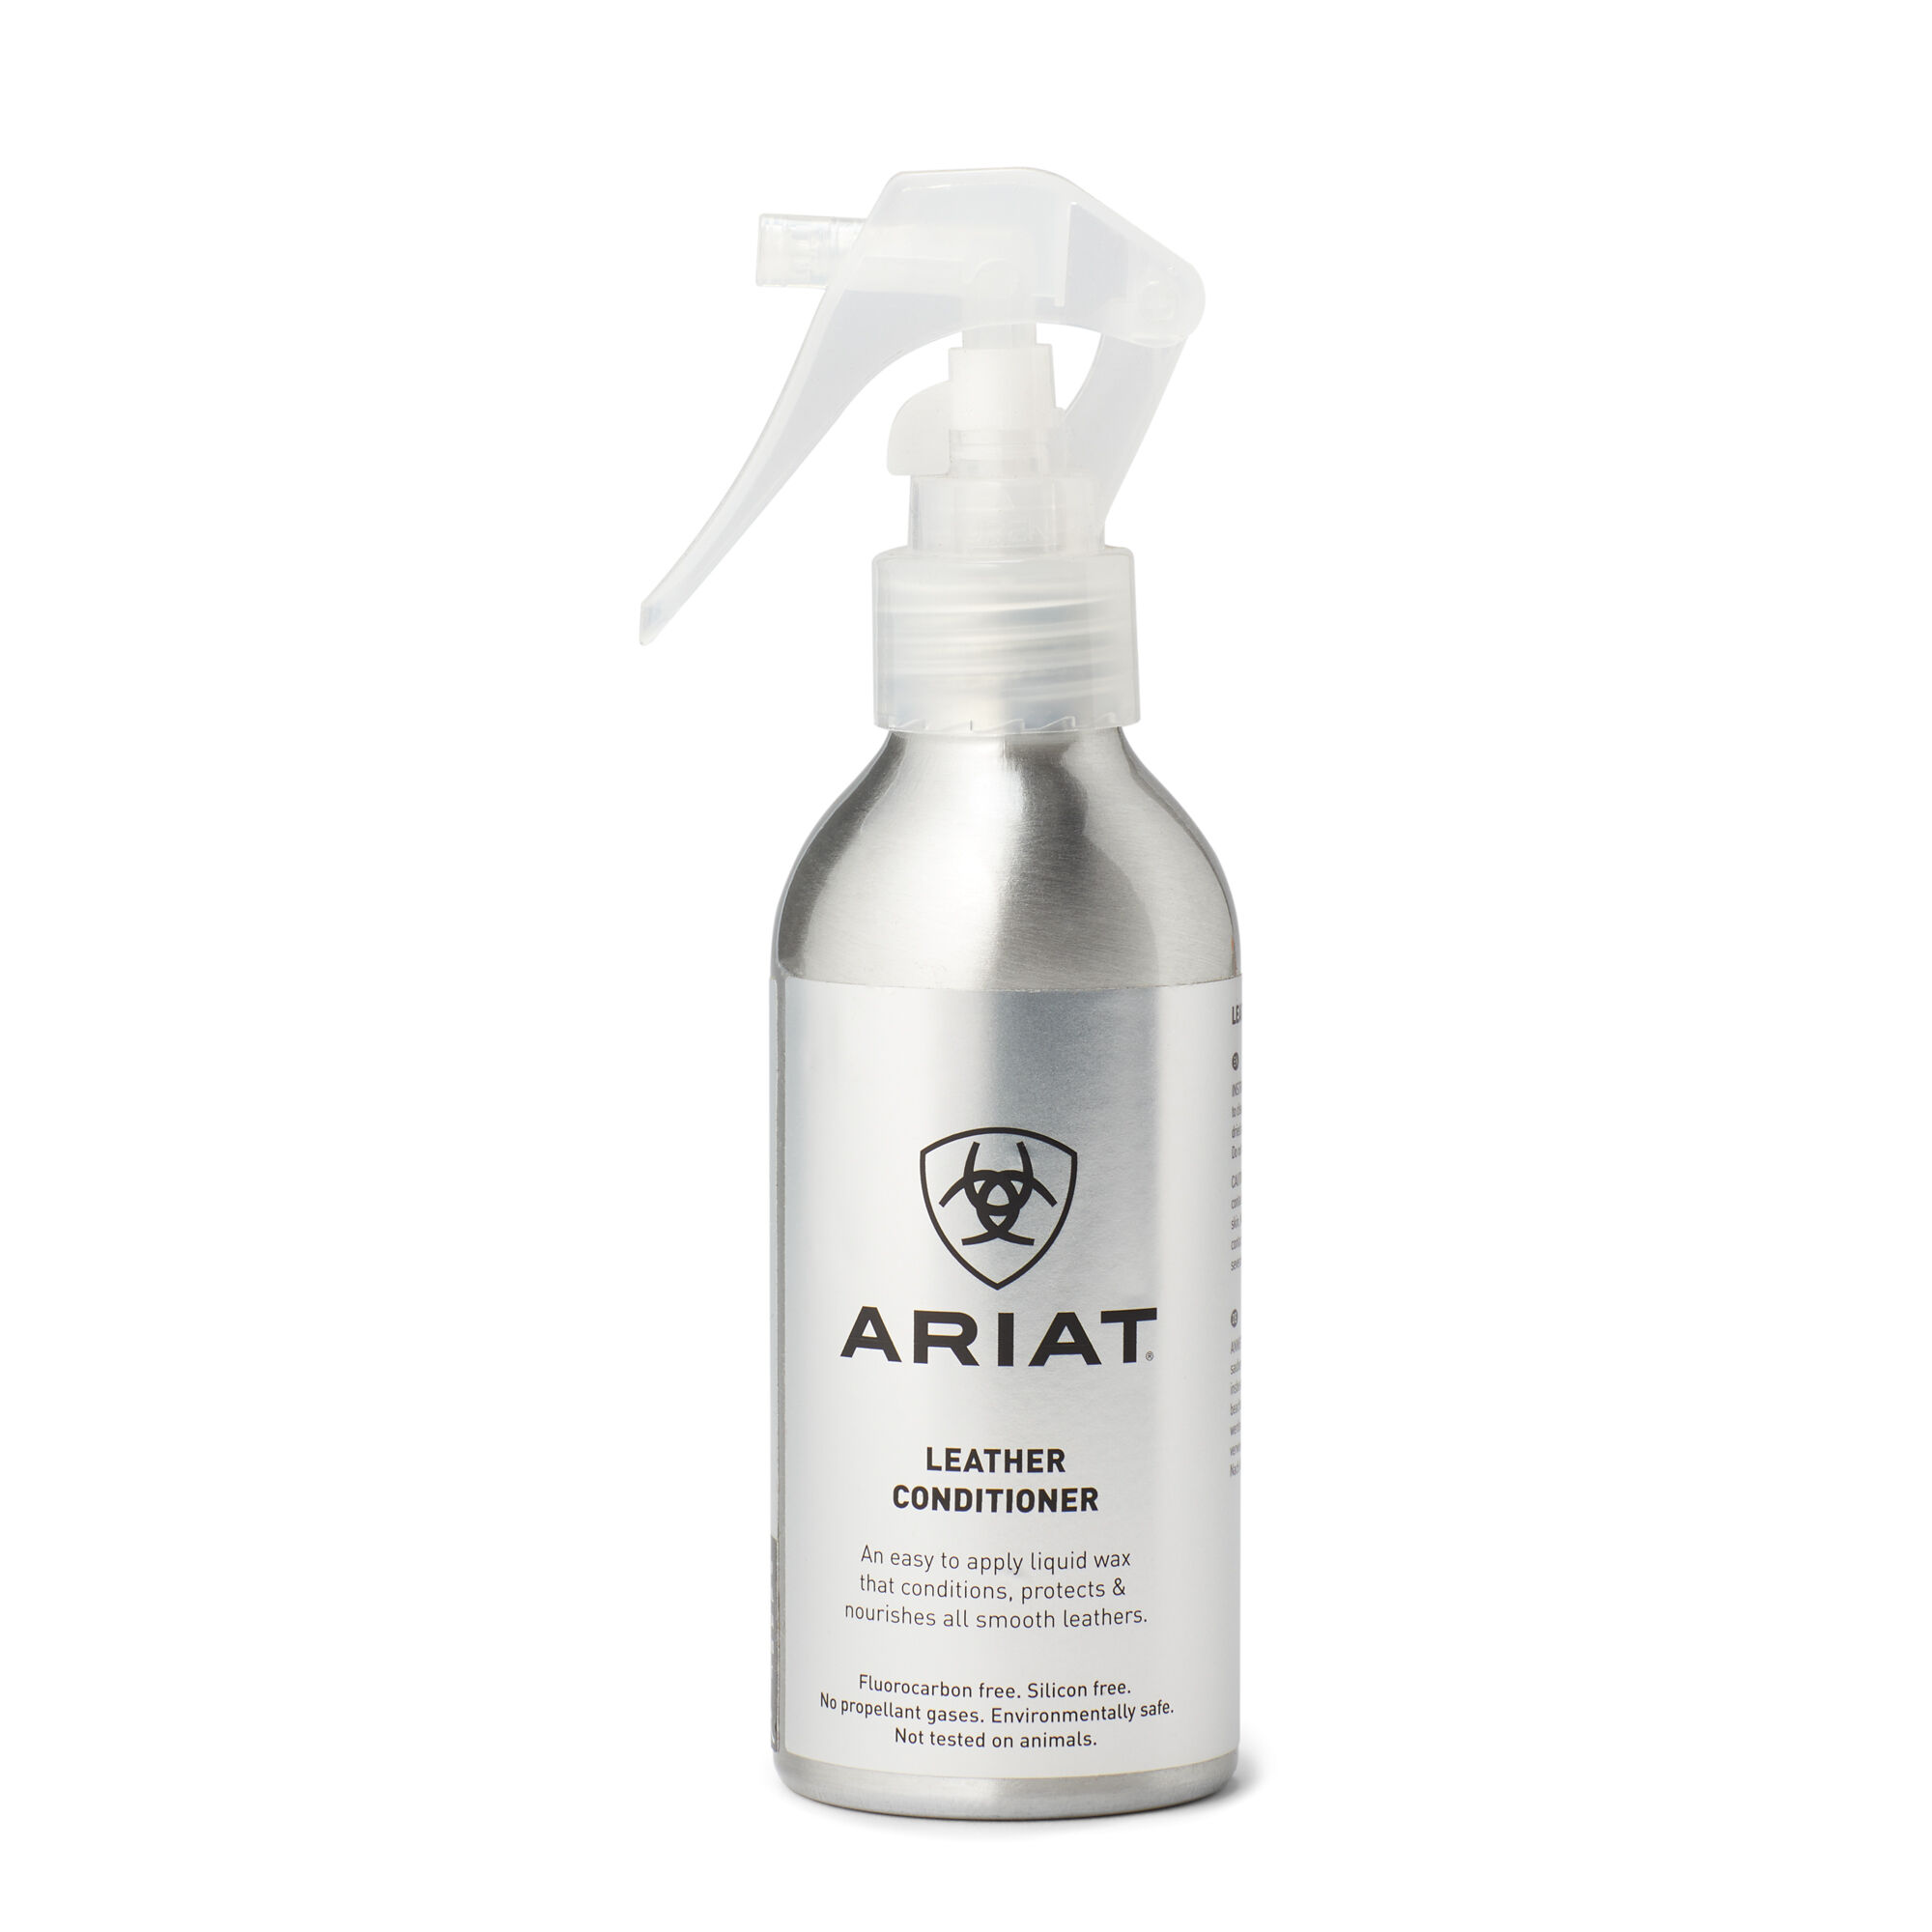 How to Use Ariat Liquid Wax Leather Conditioner?